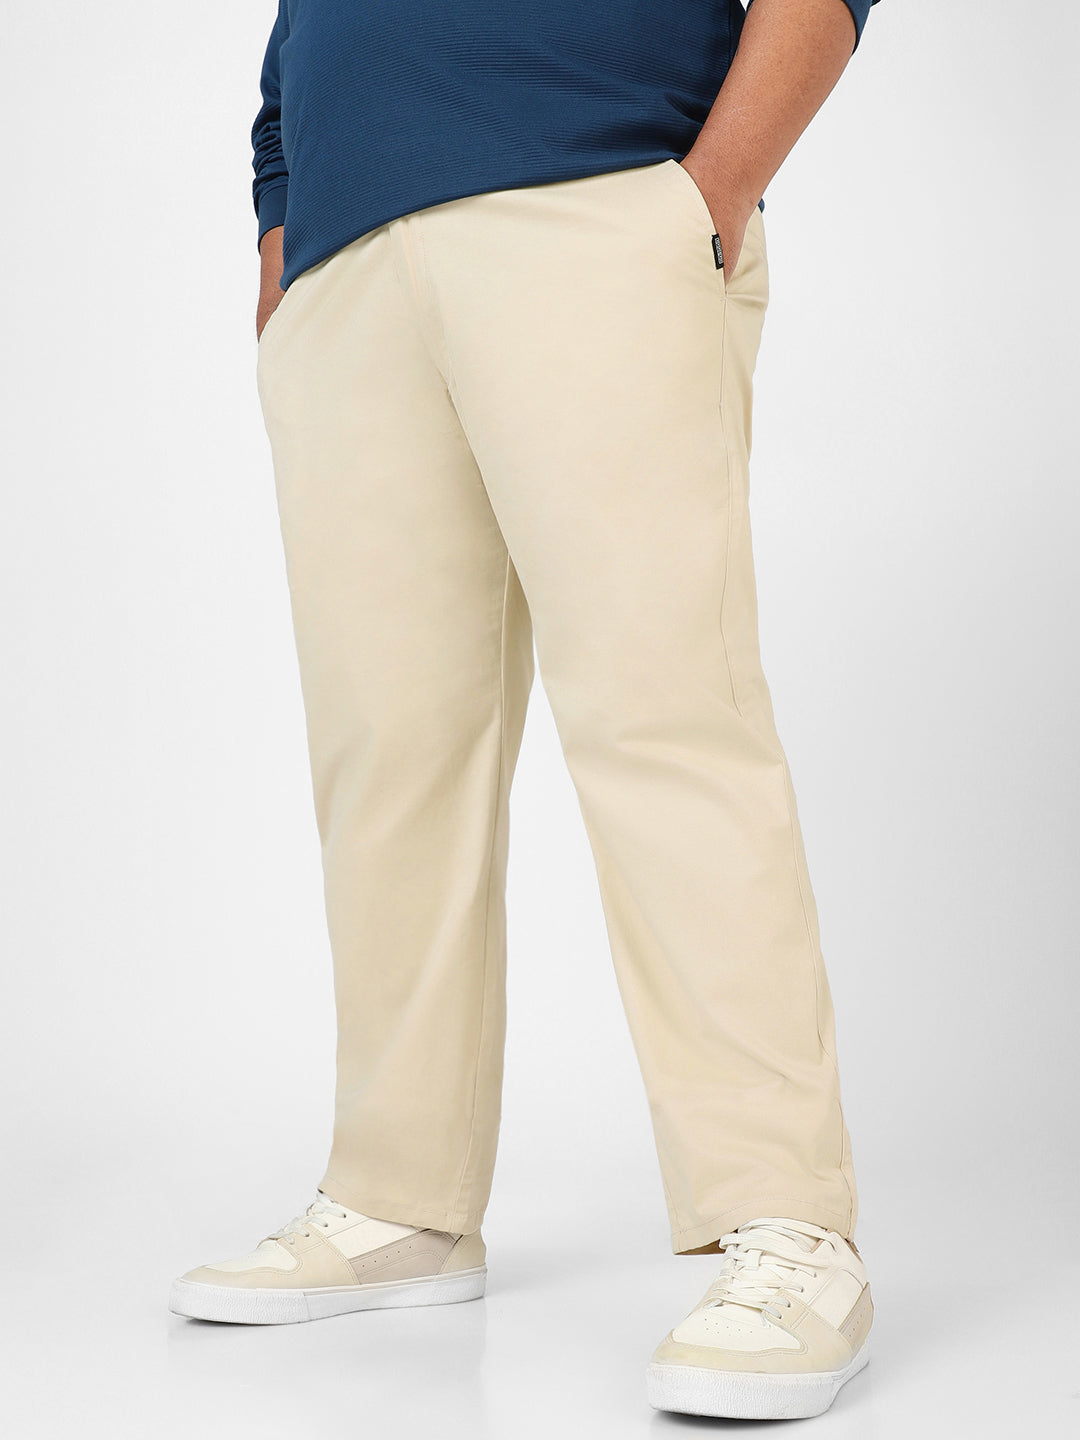 Plus Men's Cream Cotton Regular Fit Casual Chinos Trousers Stretch